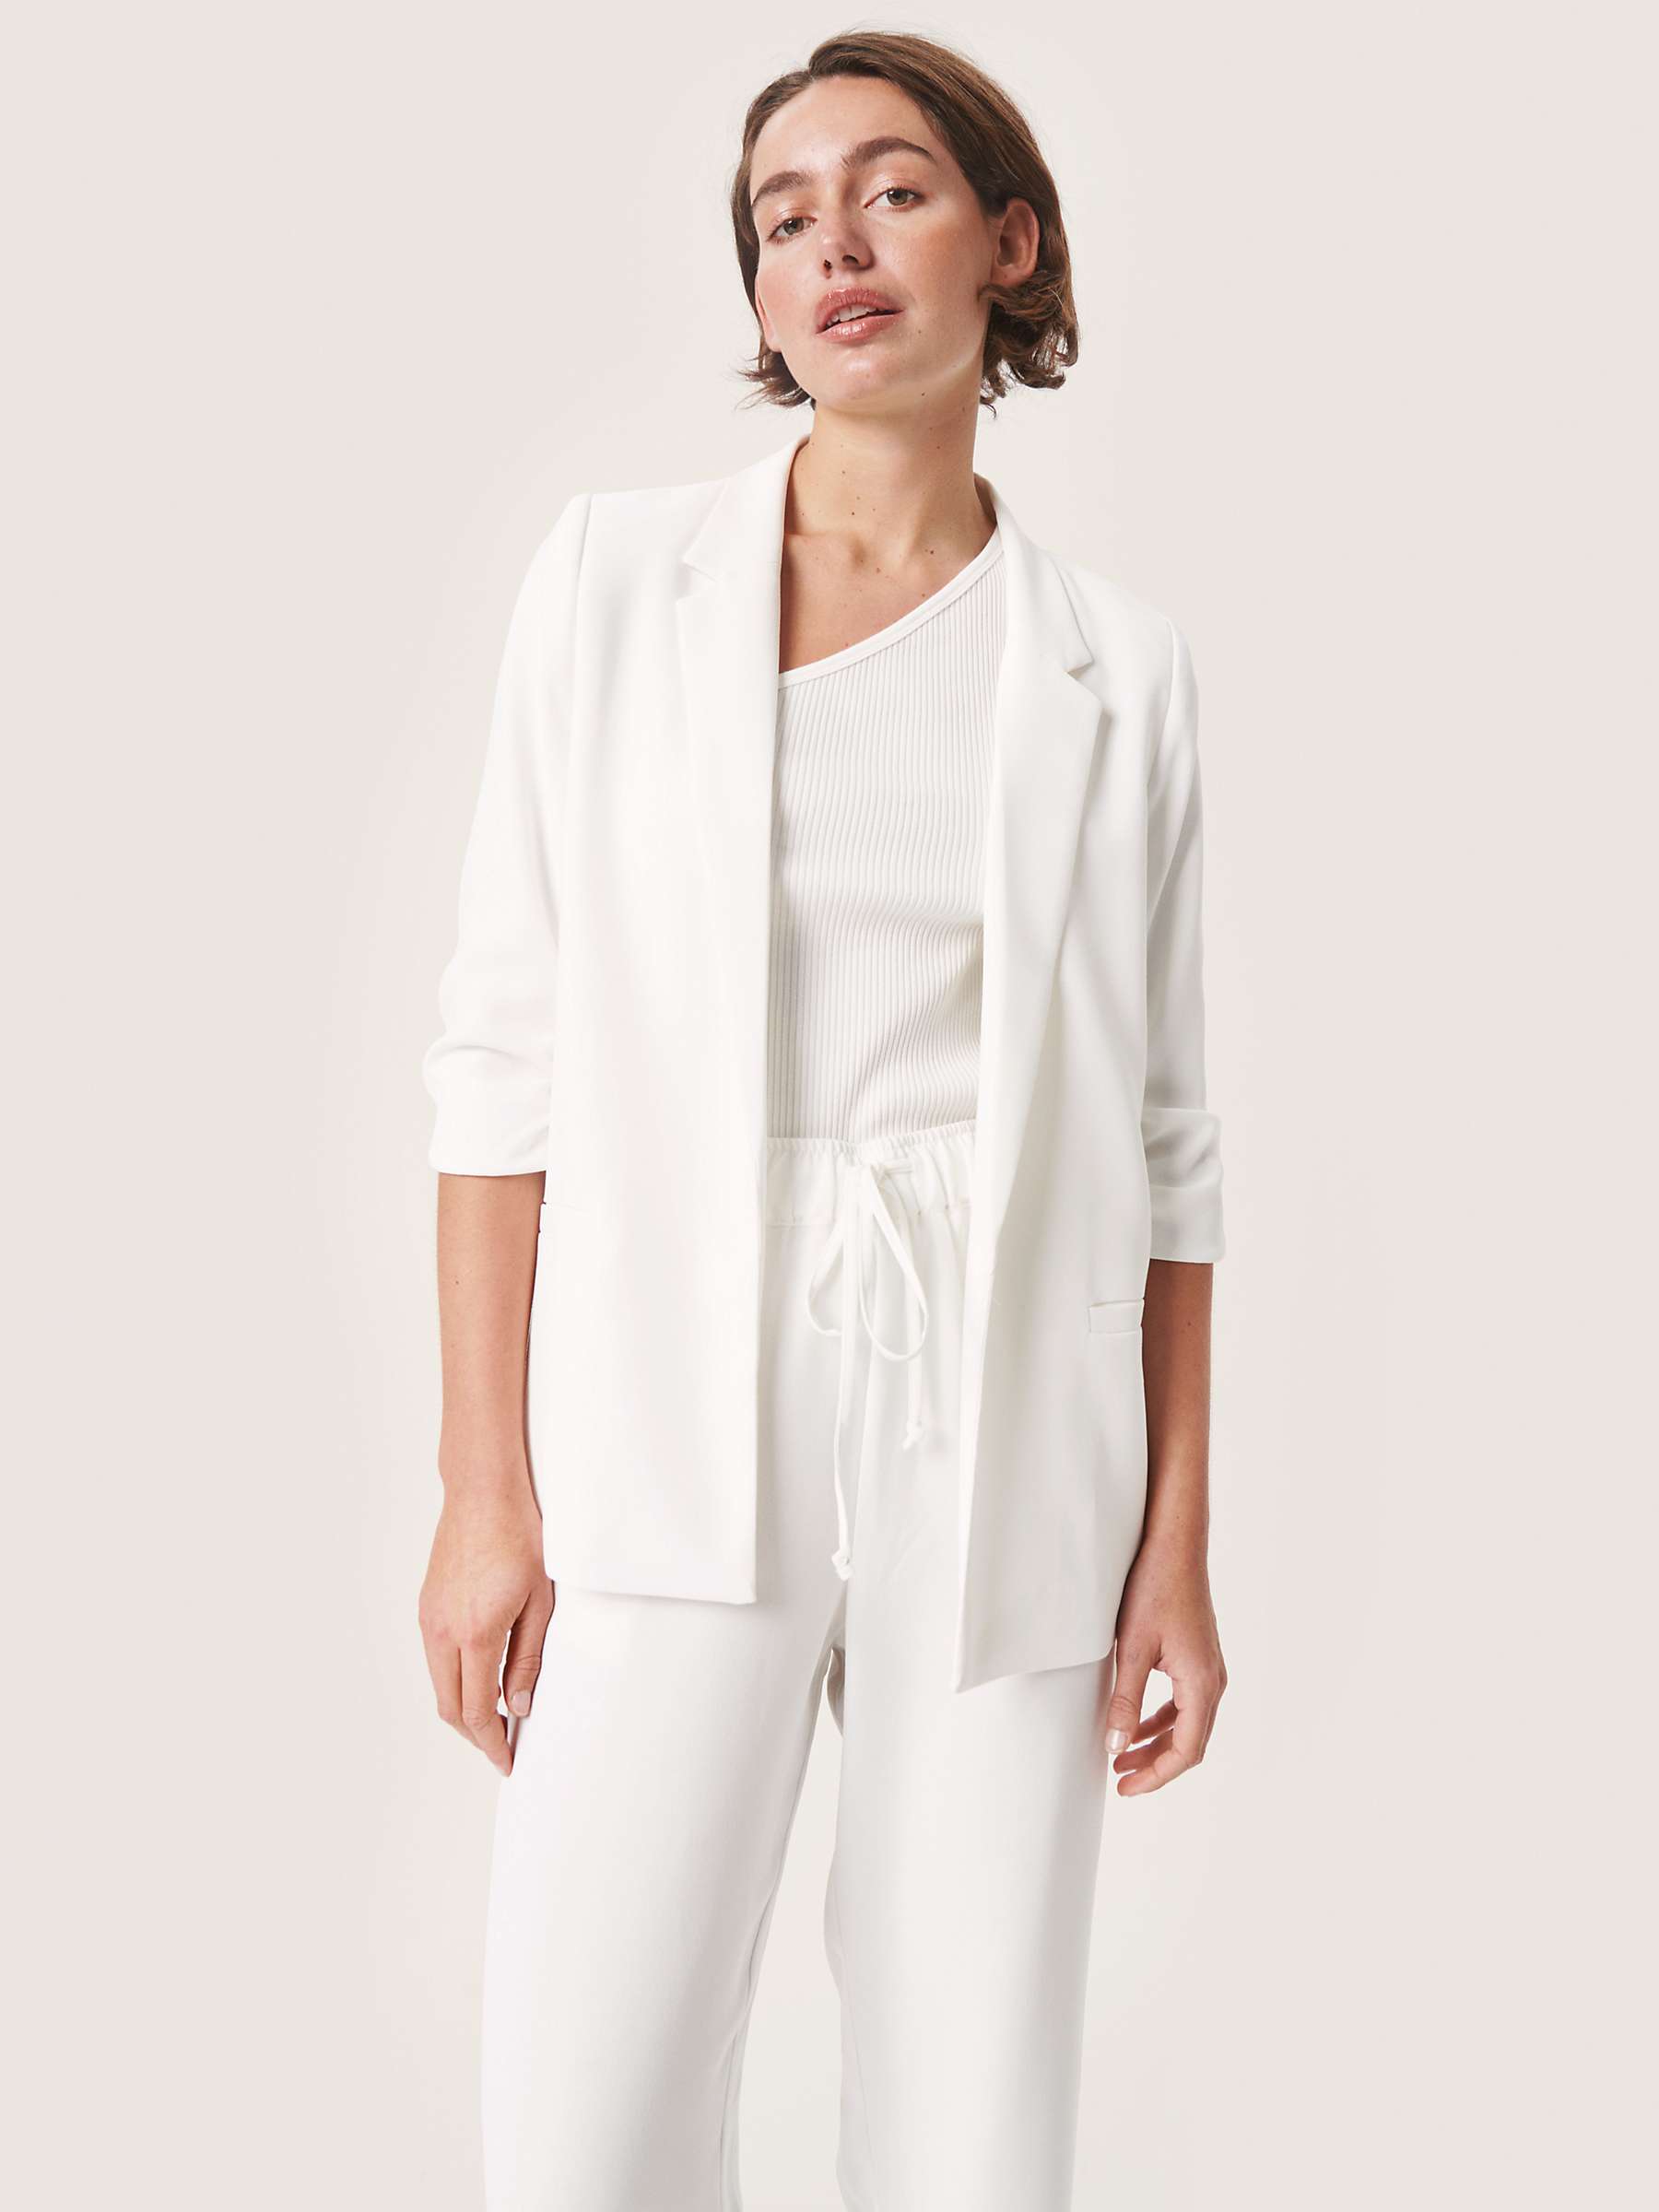 Buy Soaked In Luxury Shirley Plain Ruched Sleeve Blazer Online at johnlewis.com